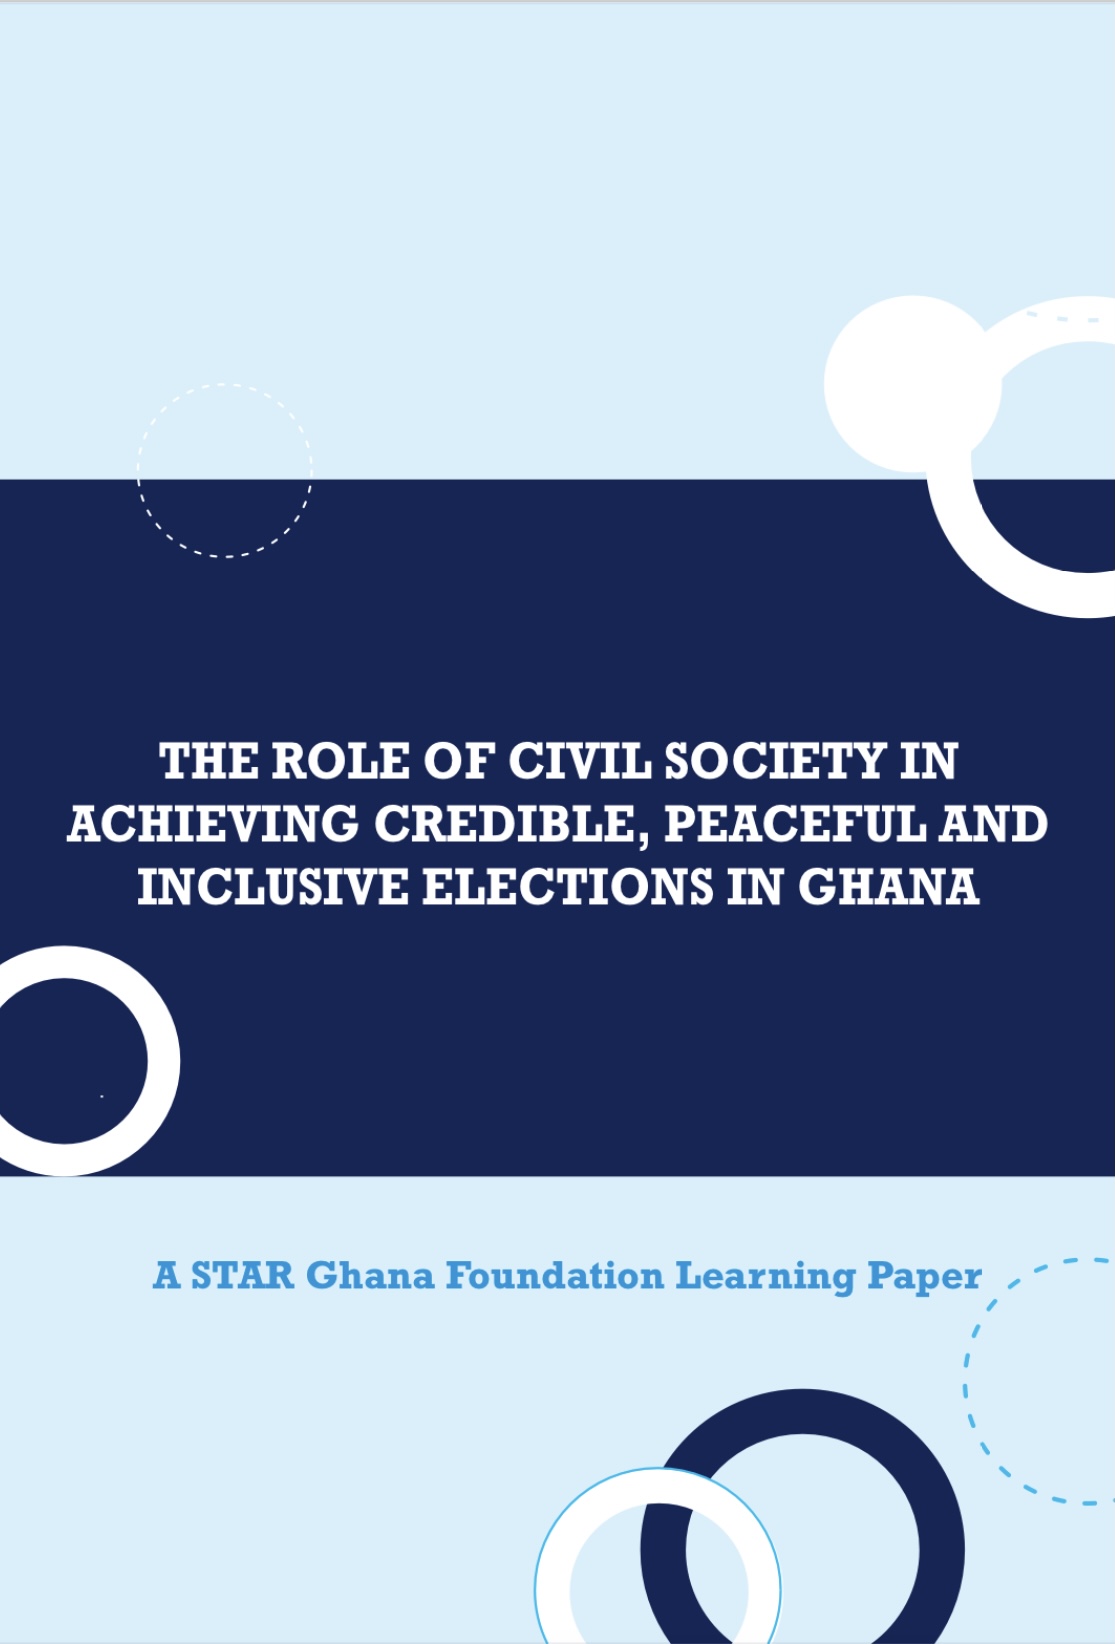 THE ROLE OF CIVIL SOCIETY IN ACHIEVING CREDIBLE, PEACEFUL AND INCLUSIVE ELECTIONS 2020 IN GHANA